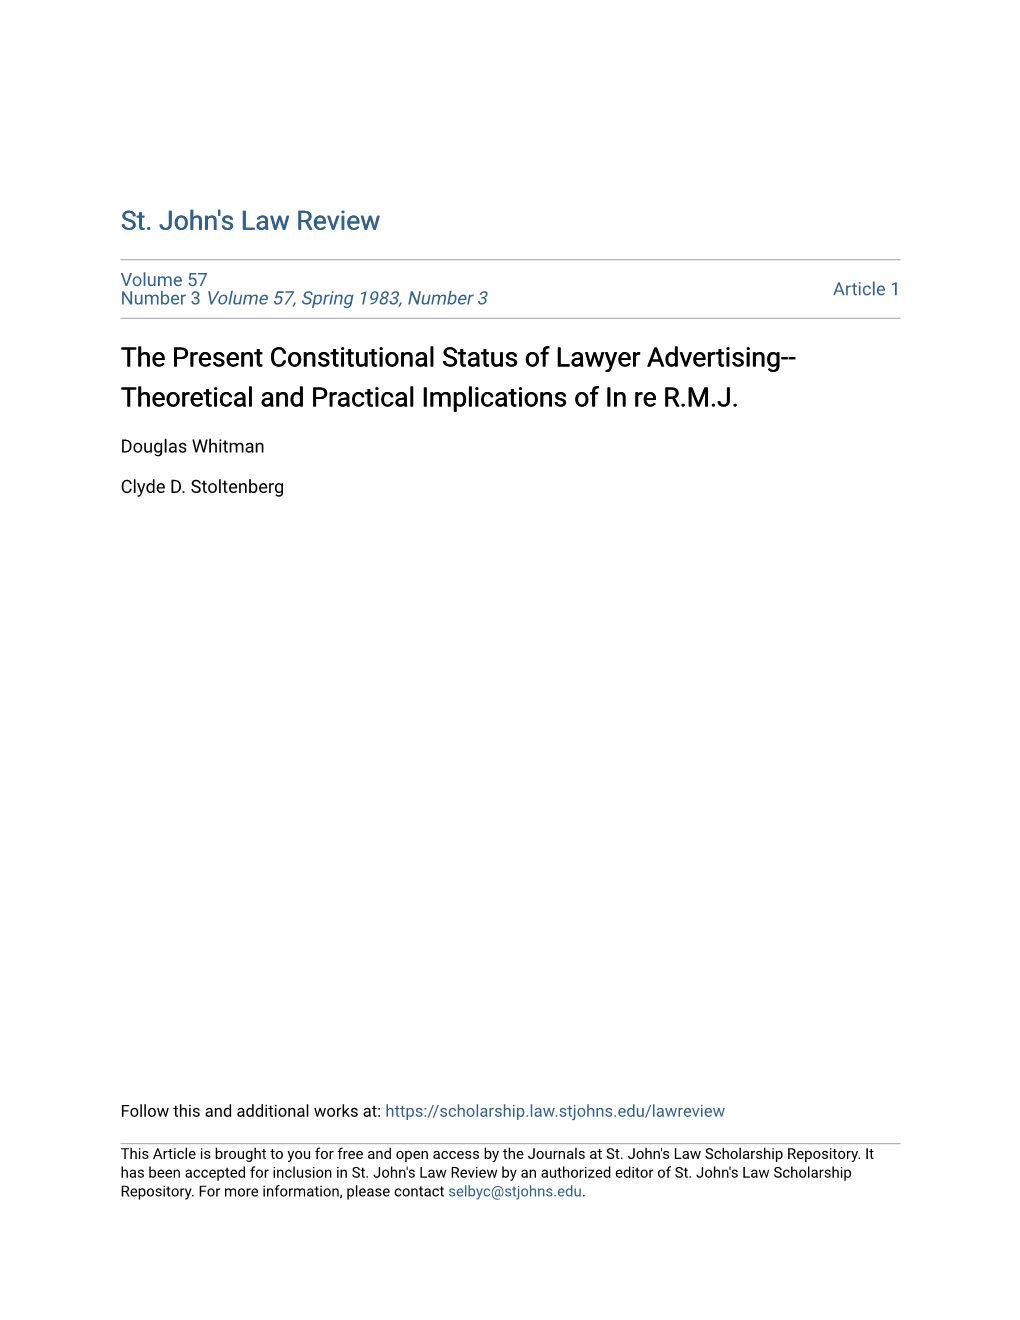 The Present Constitutional Status of Lawyer Advertising-- Theoretical and Practical Implications of in Re R.M.J